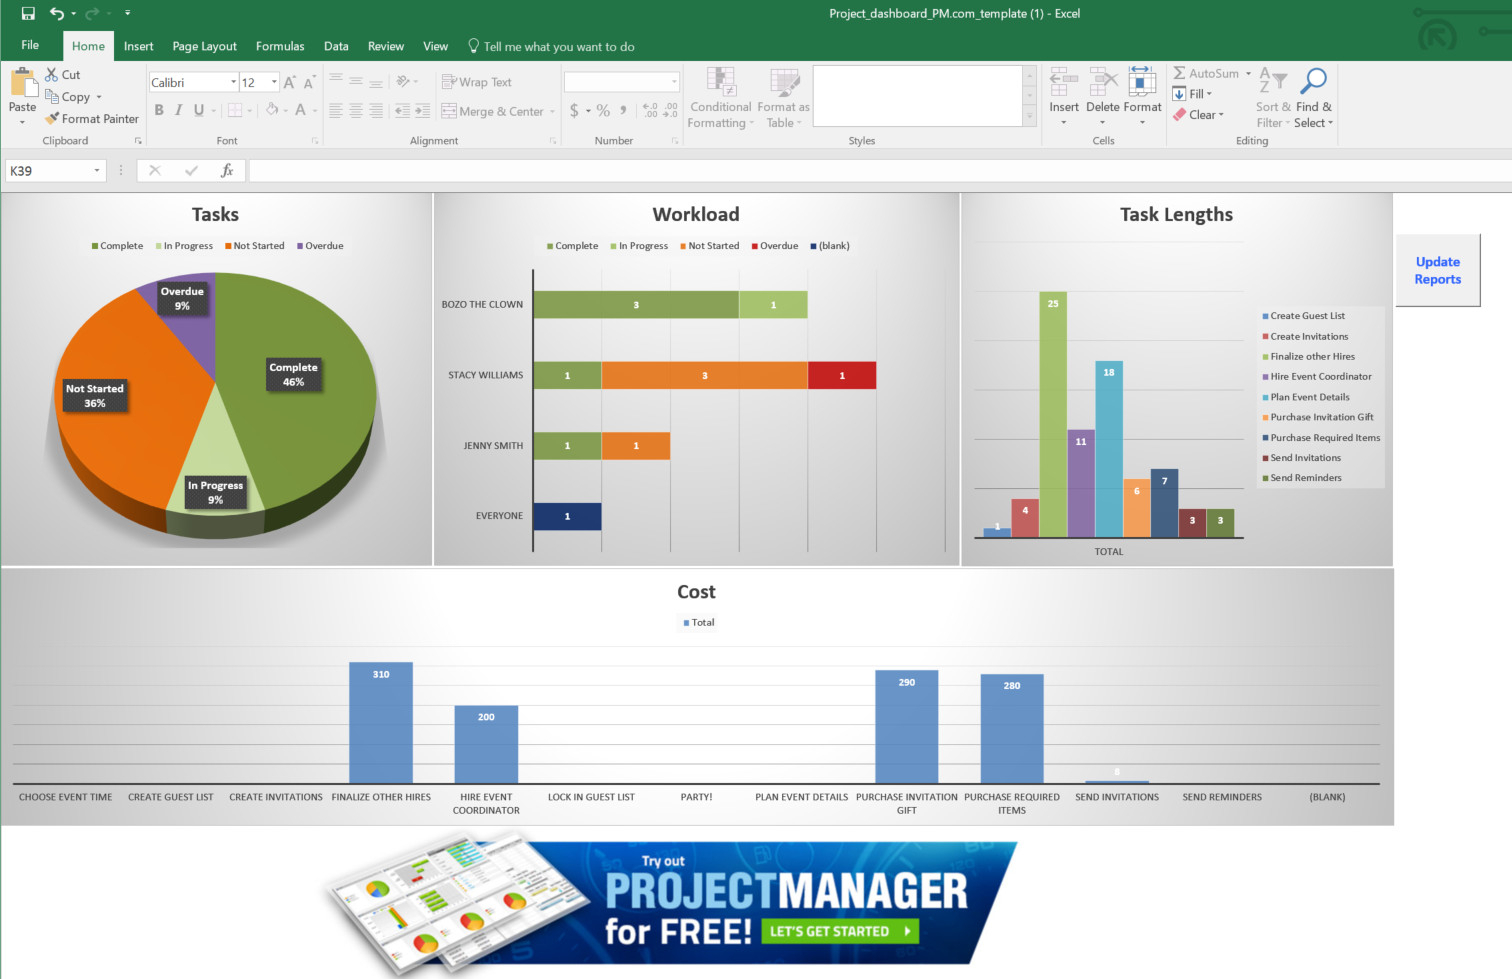 Guide To Excel Project Management - Projectmanager With Time Management Excel Template